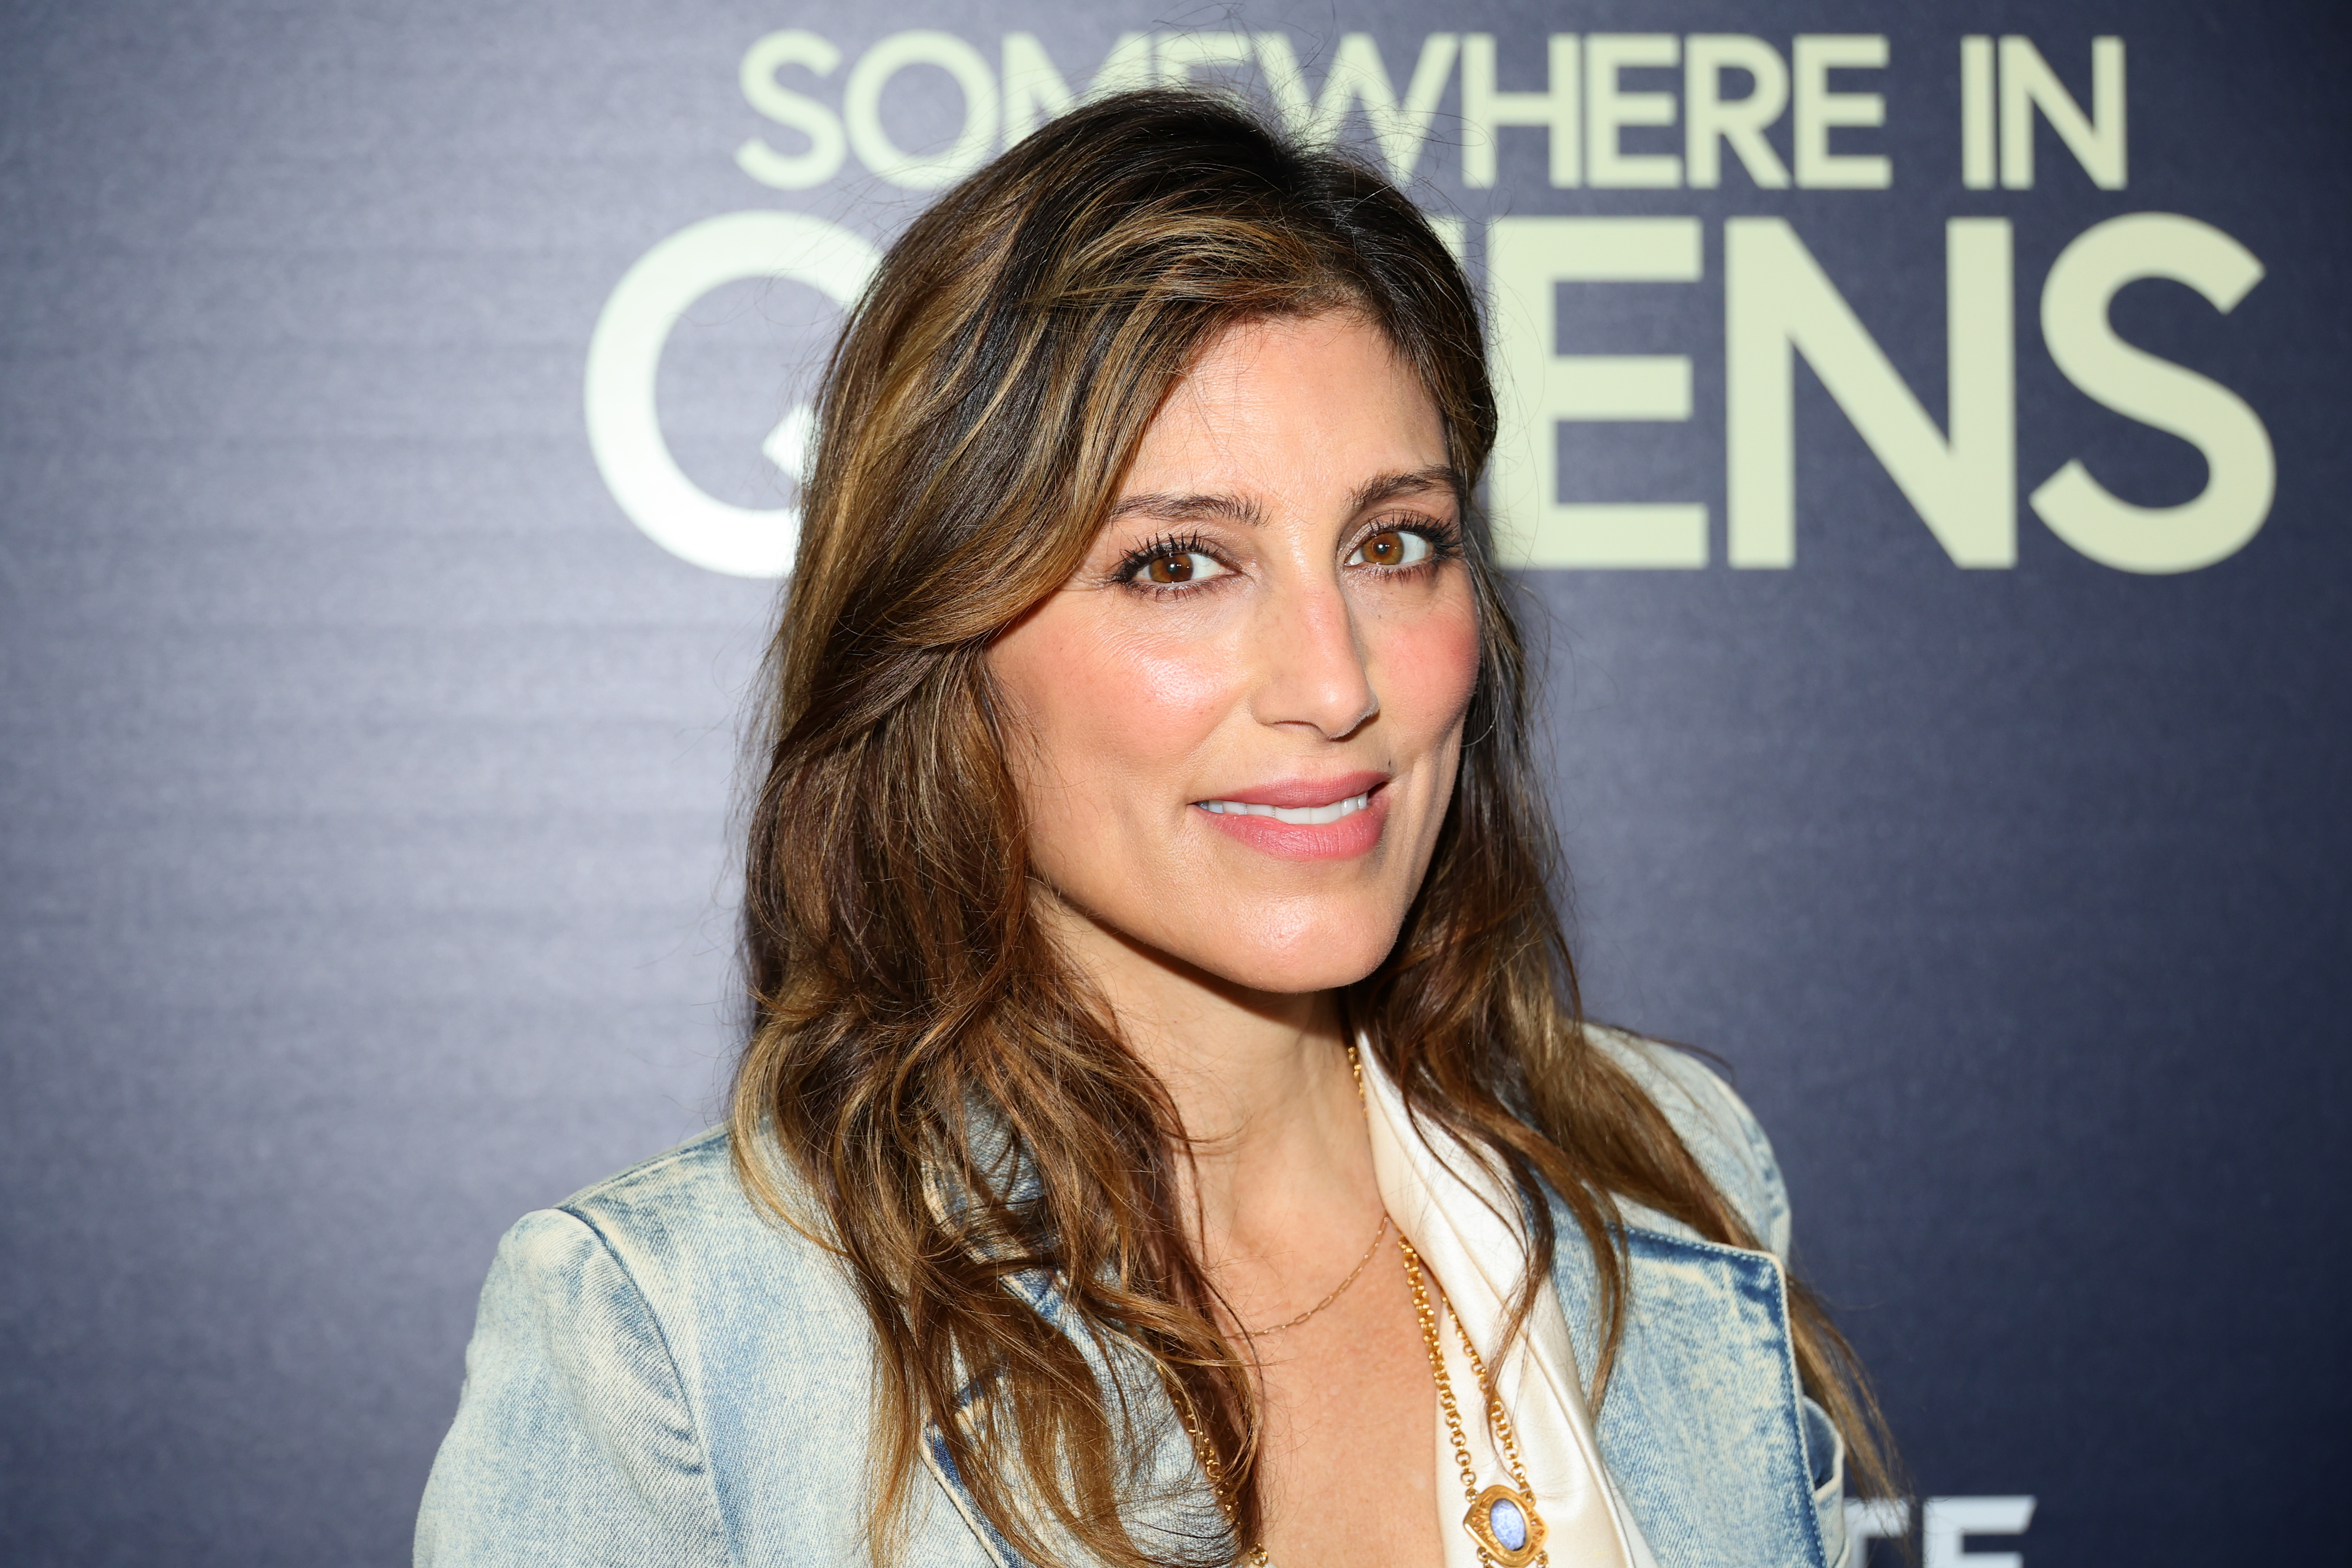 Jennifer Esposito attends a screening of "Somewhere In Queens" at Metrograph, on April 17, 2023, in New York City. | Source: Getty Images